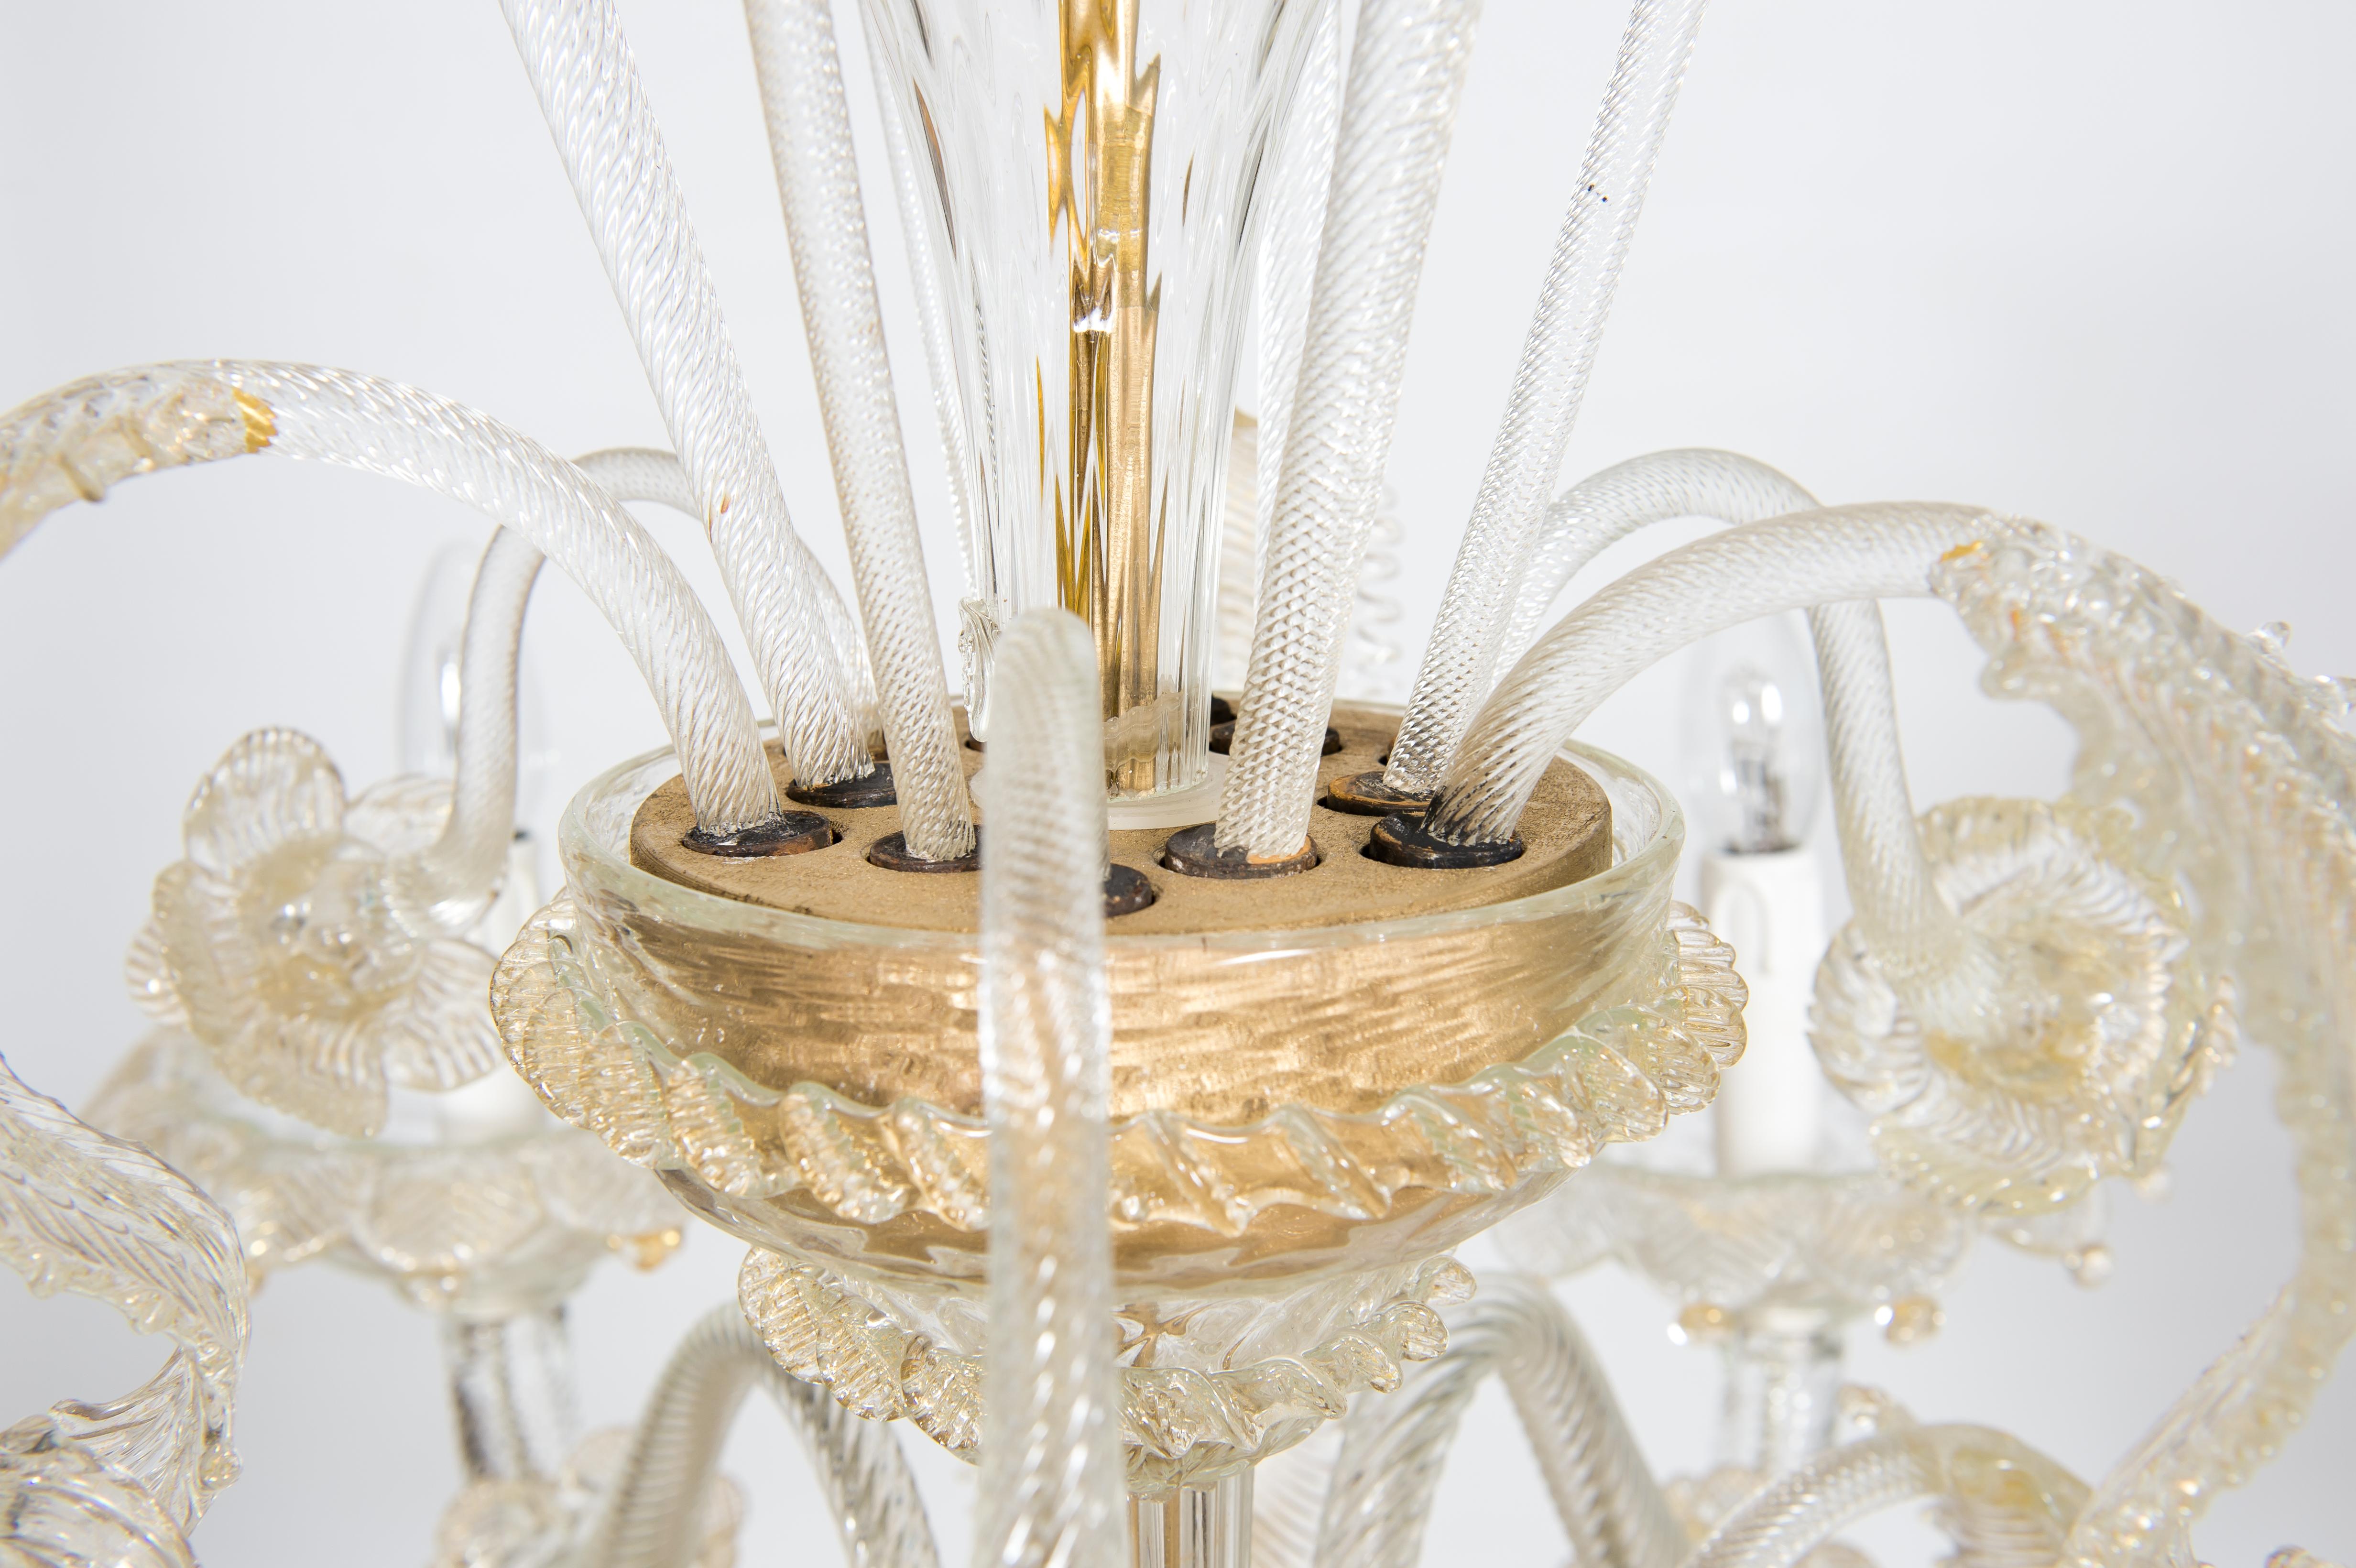 Hand-Crafted Floral Murano Glass Chandelier with “Riga Dritta” Decorations, 20th Century